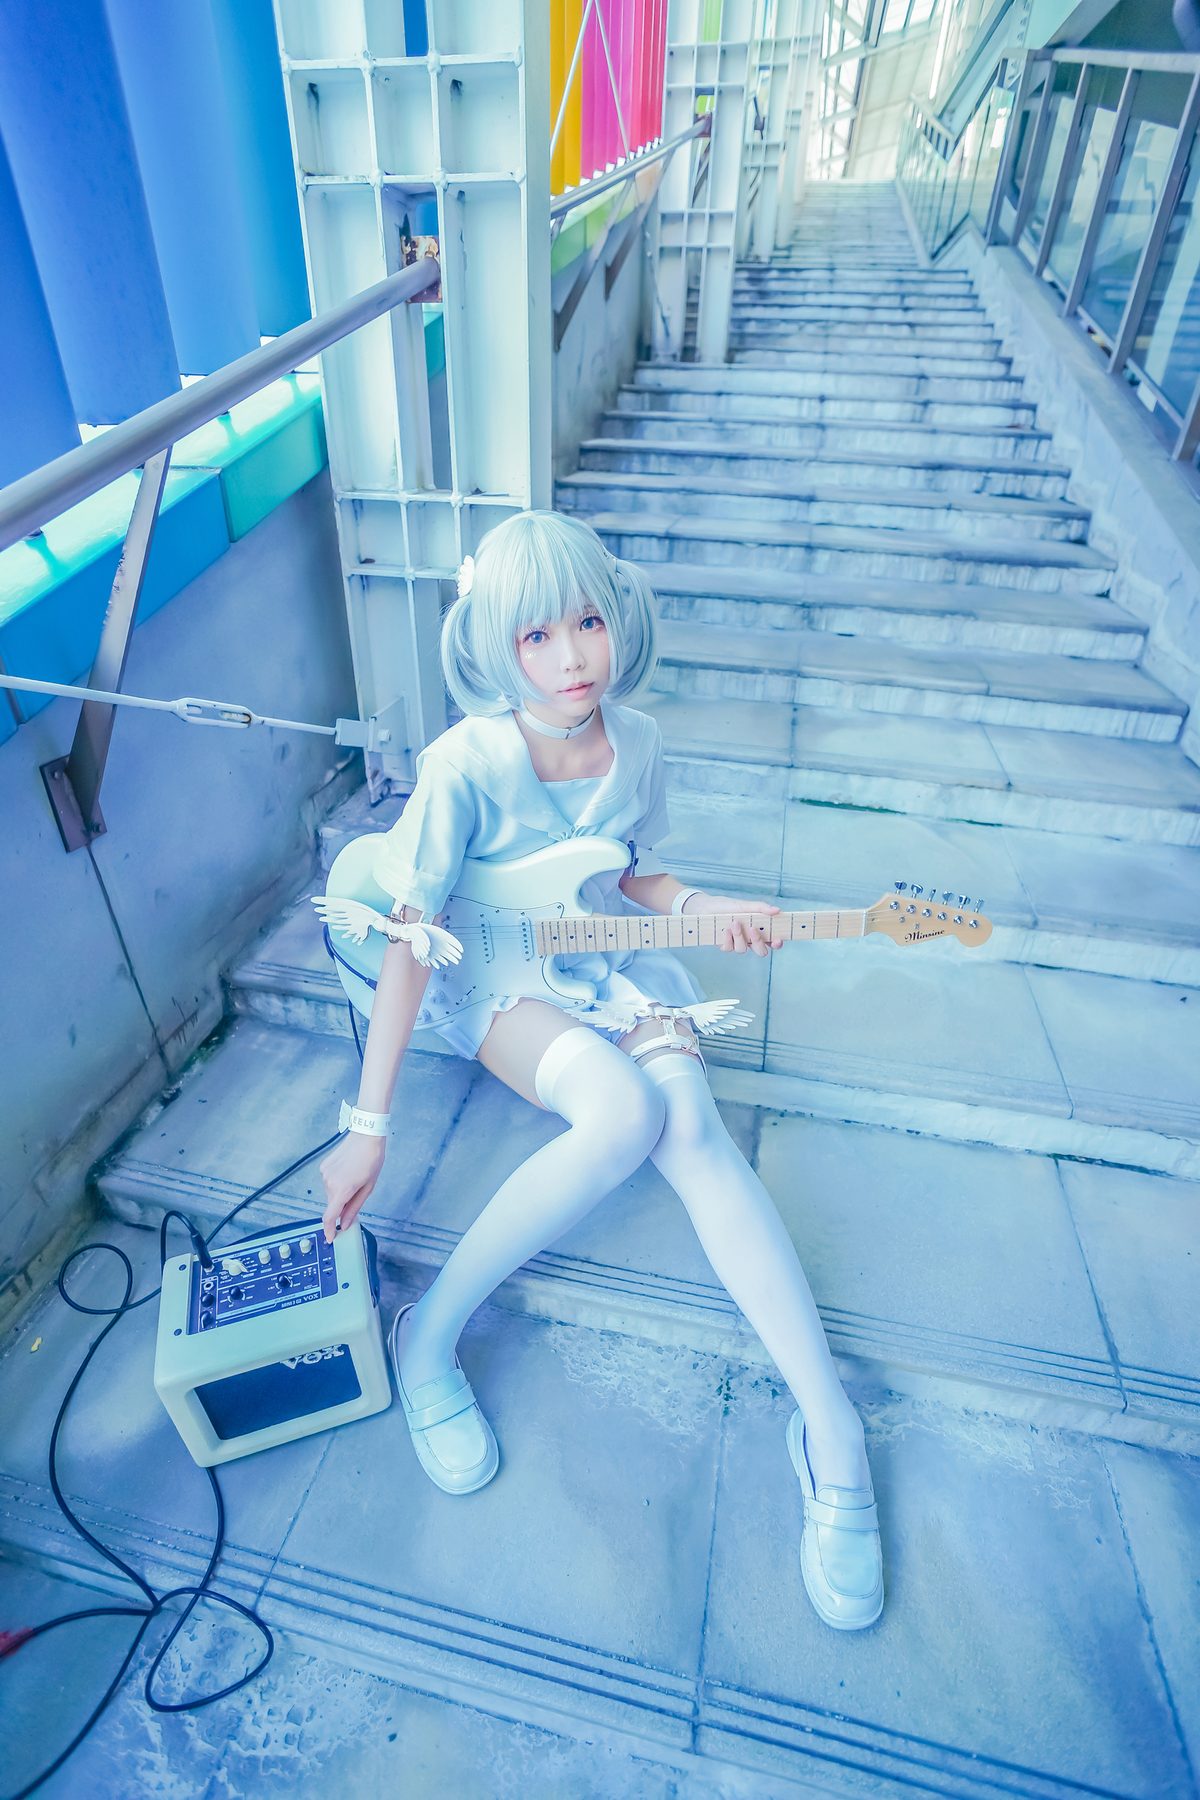 Coser@Ely_eee ElyEE子 TUESDAY TWINTAIL A 0005 6558843360.jpg